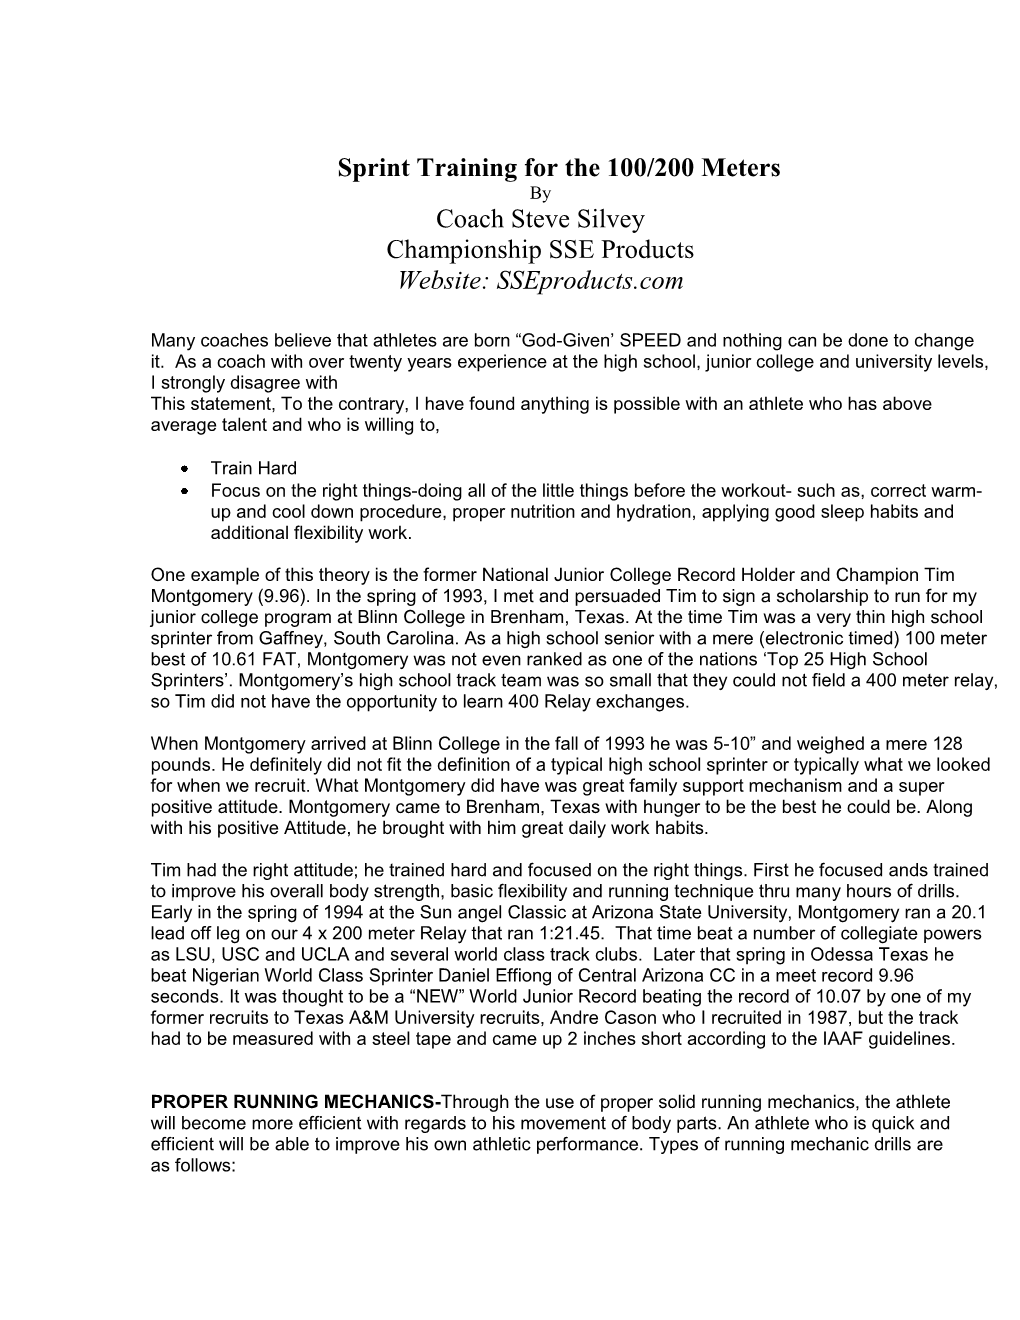 Sprint Training for the 100/200 Meters by Coach Steve Silvey Championship SSE Products Website: Sseproducts.Com